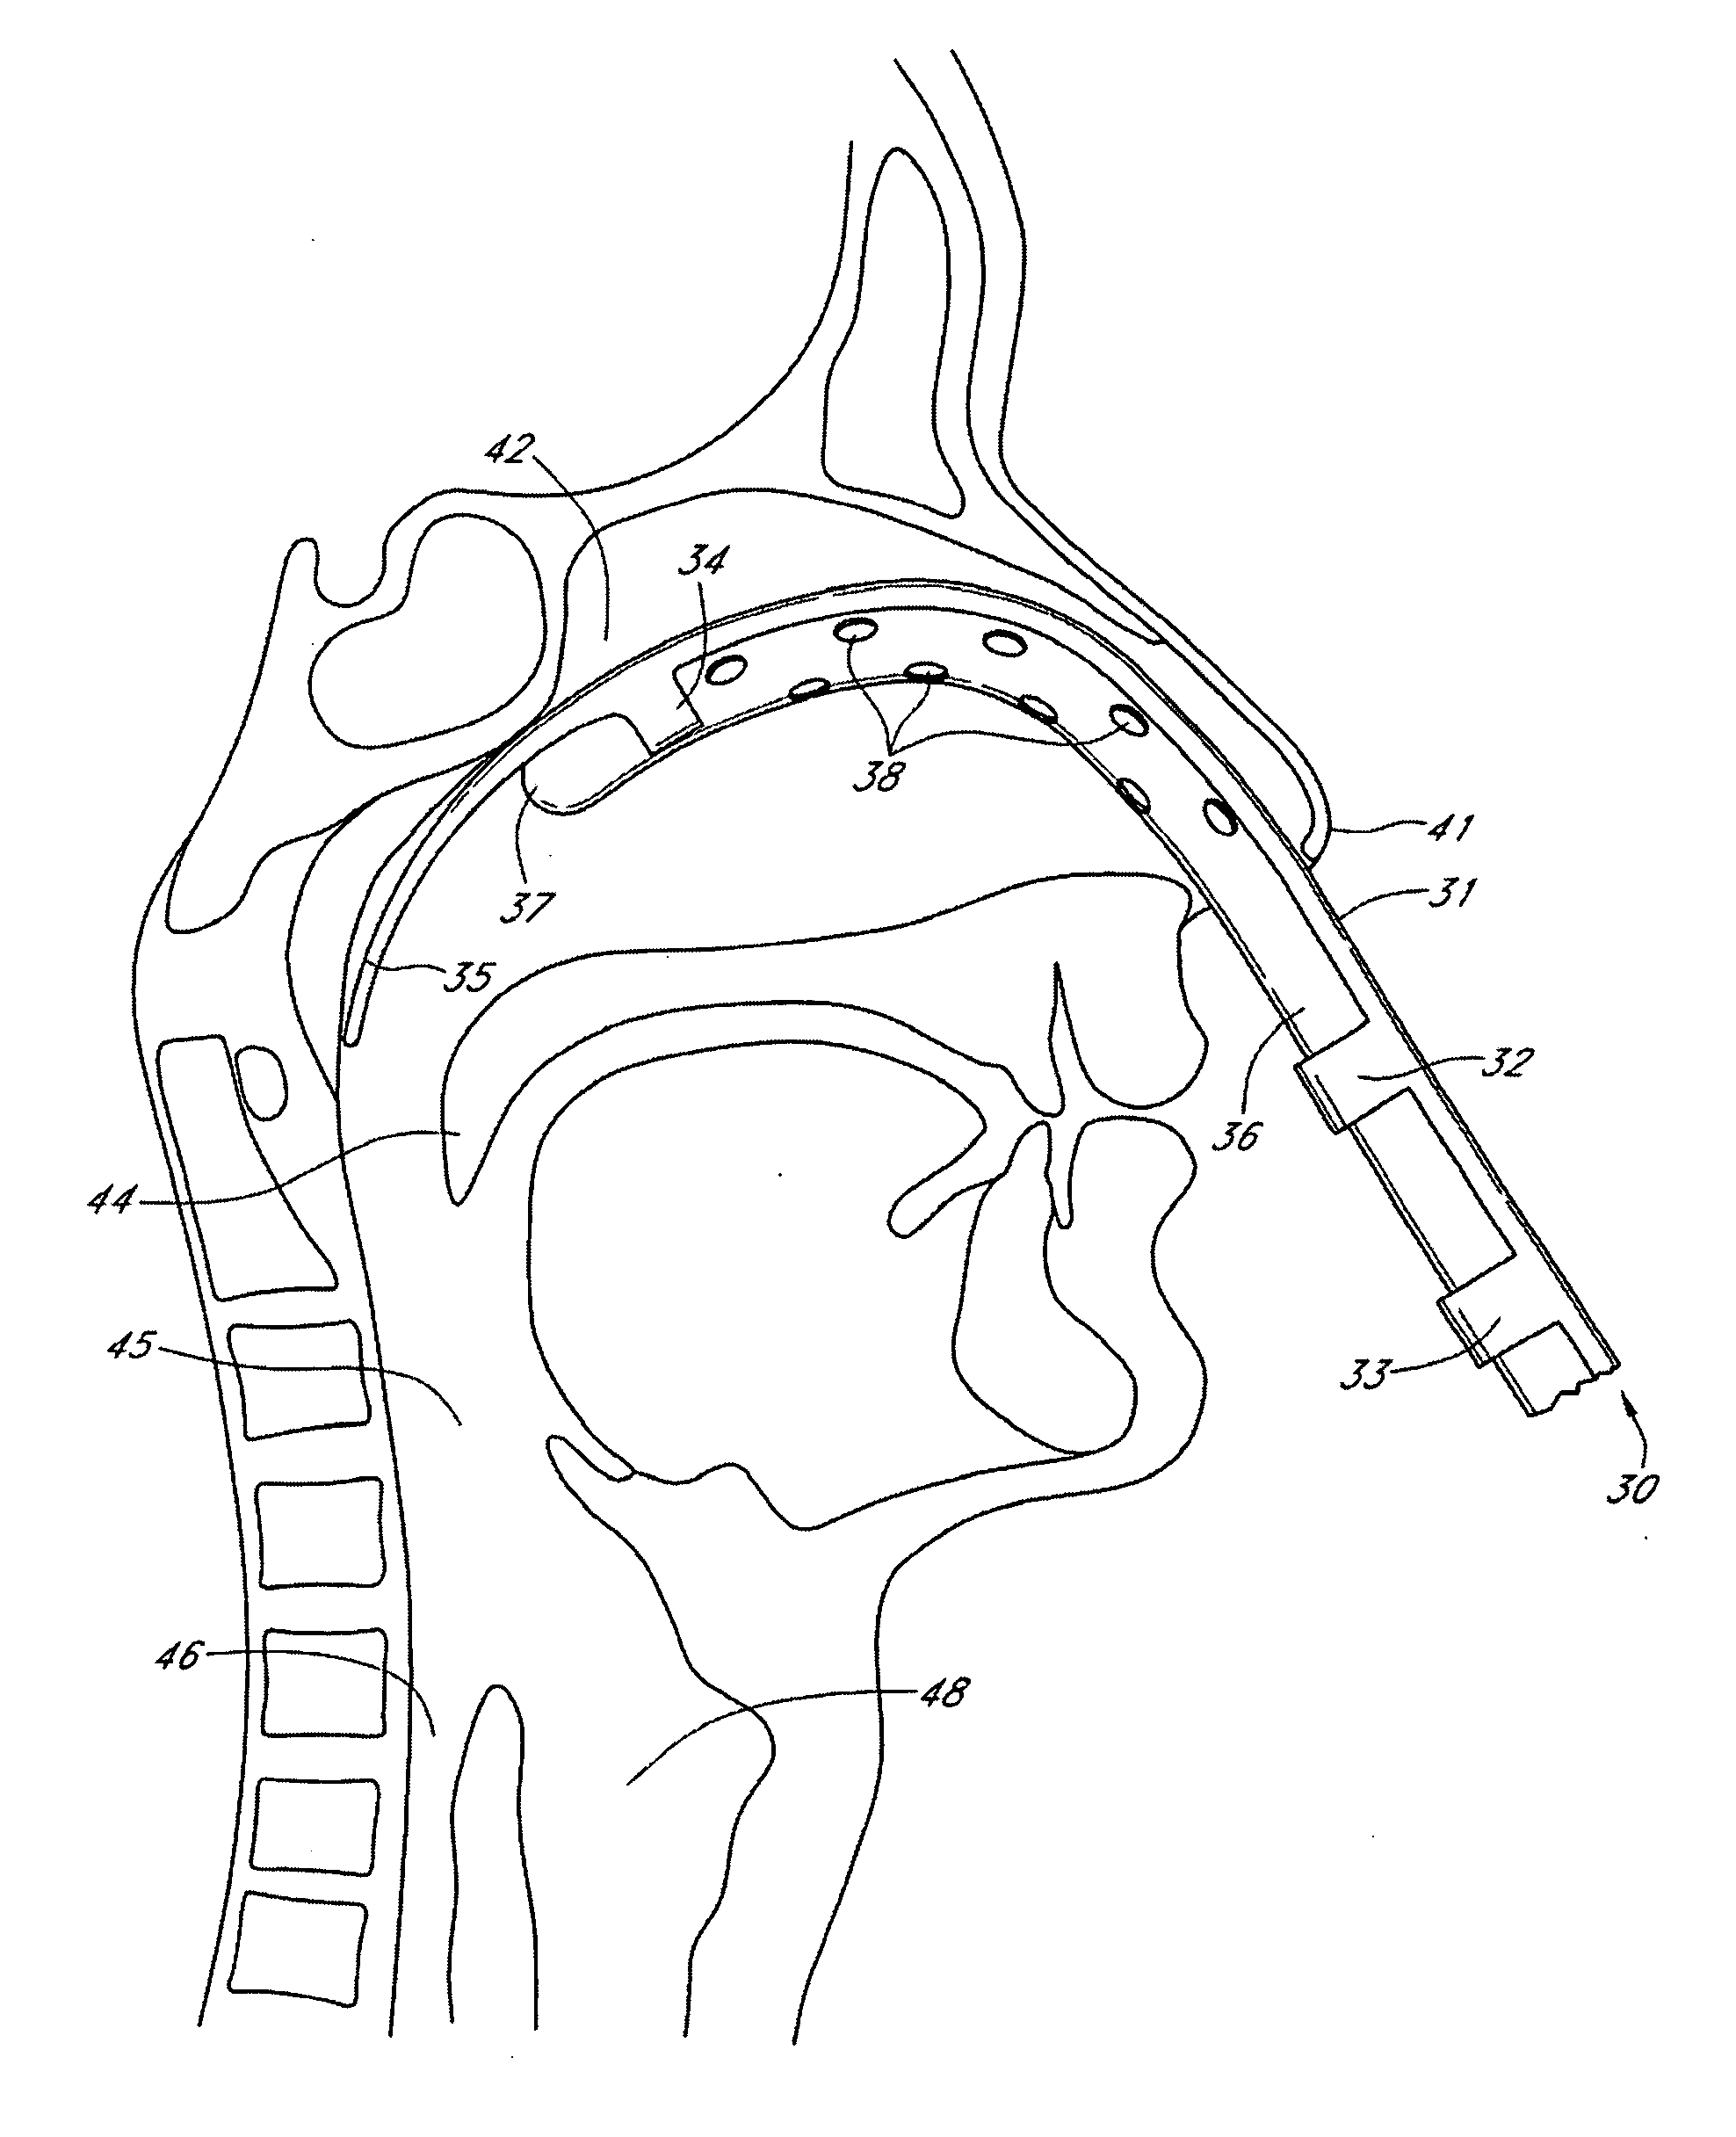 Intubation devices and methods of use thereof